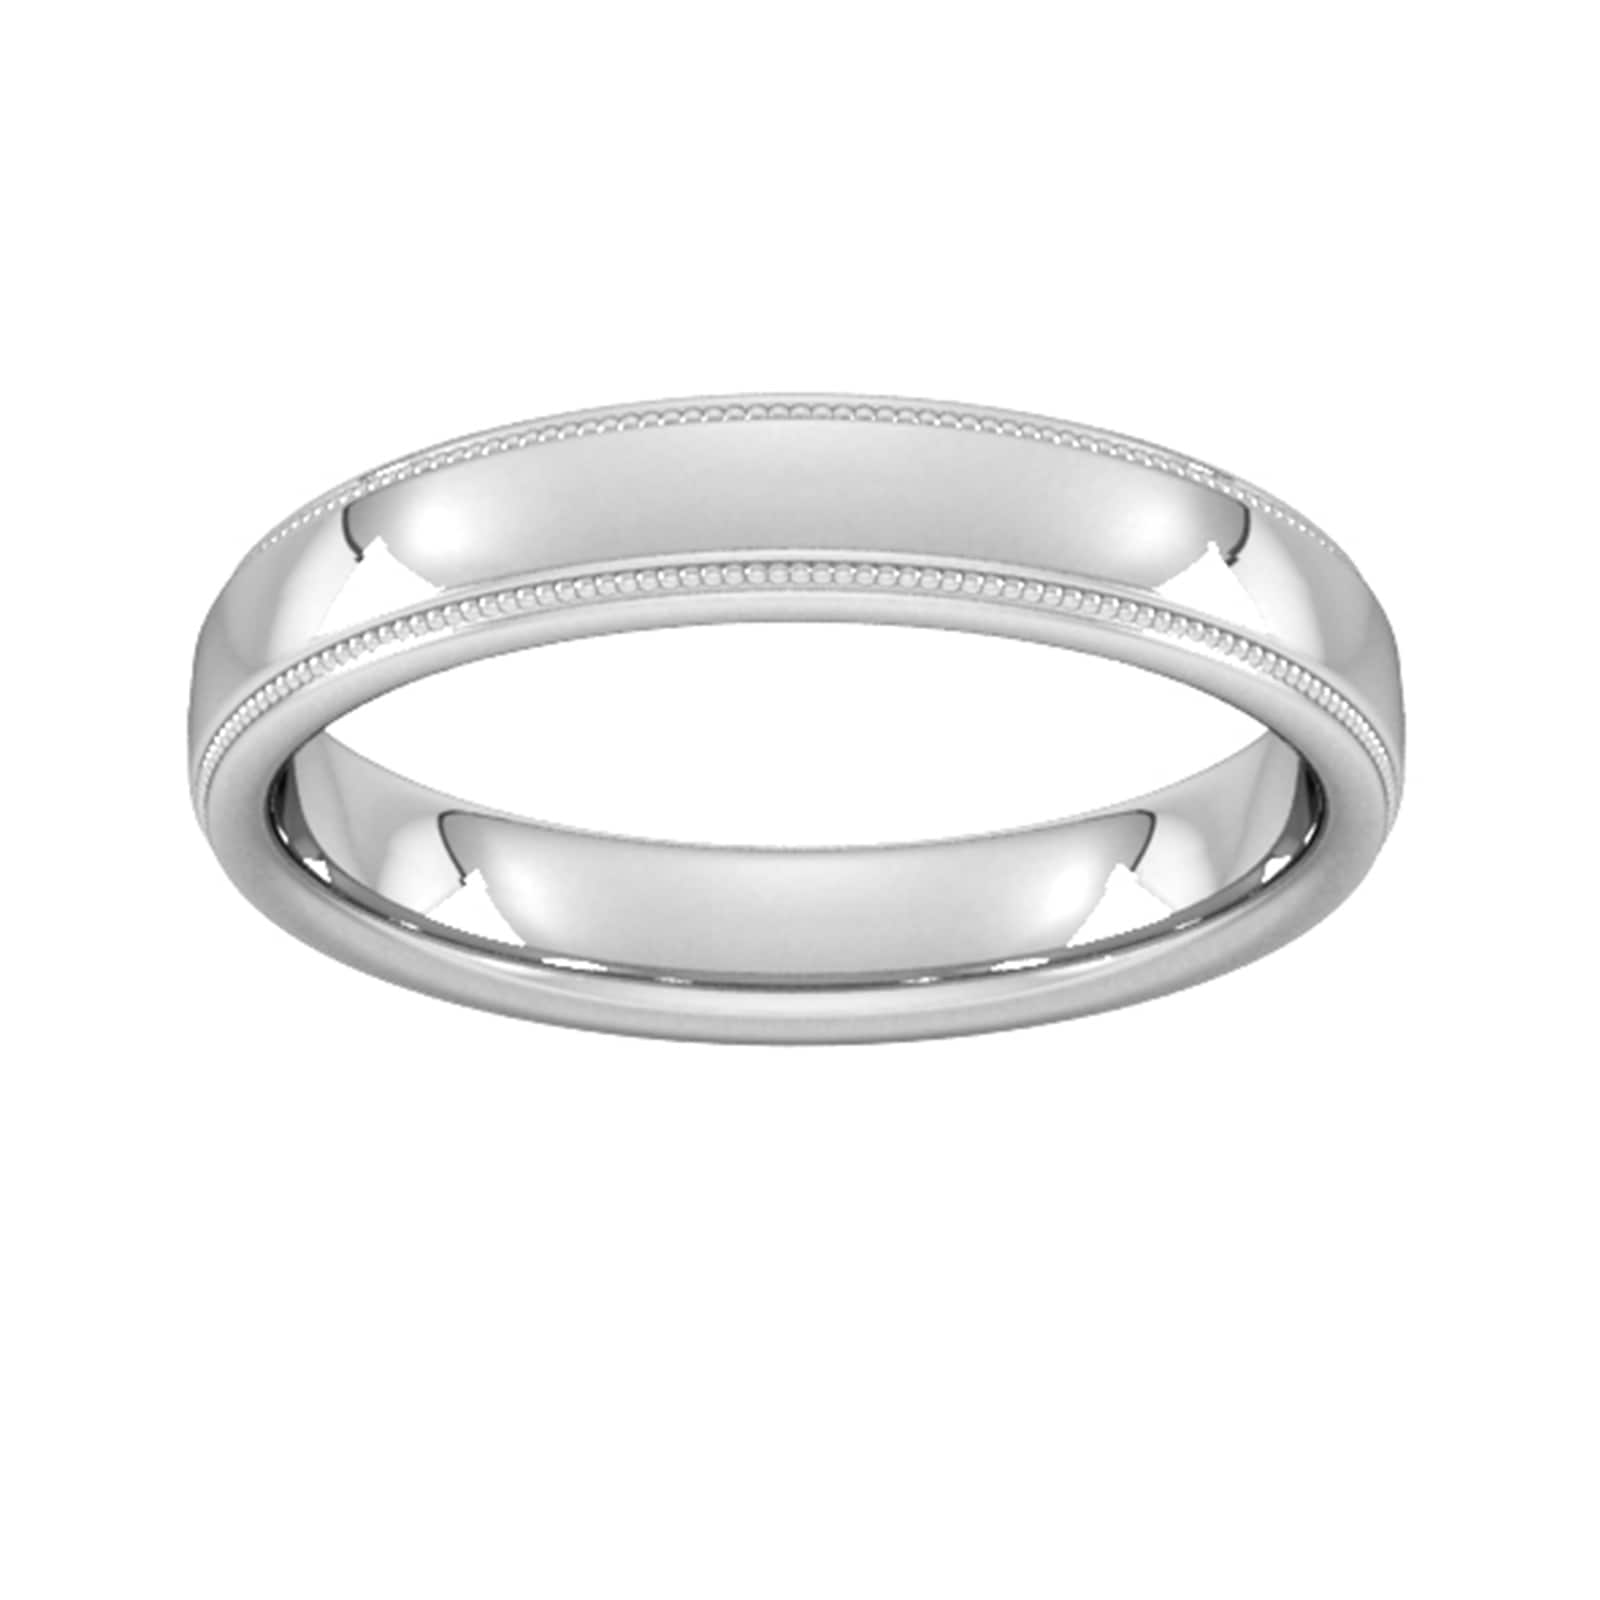 4mm Traditional Court Heavy Milgrain Edge Wedding Ring In 18 Carat White Gold - Ring Size L